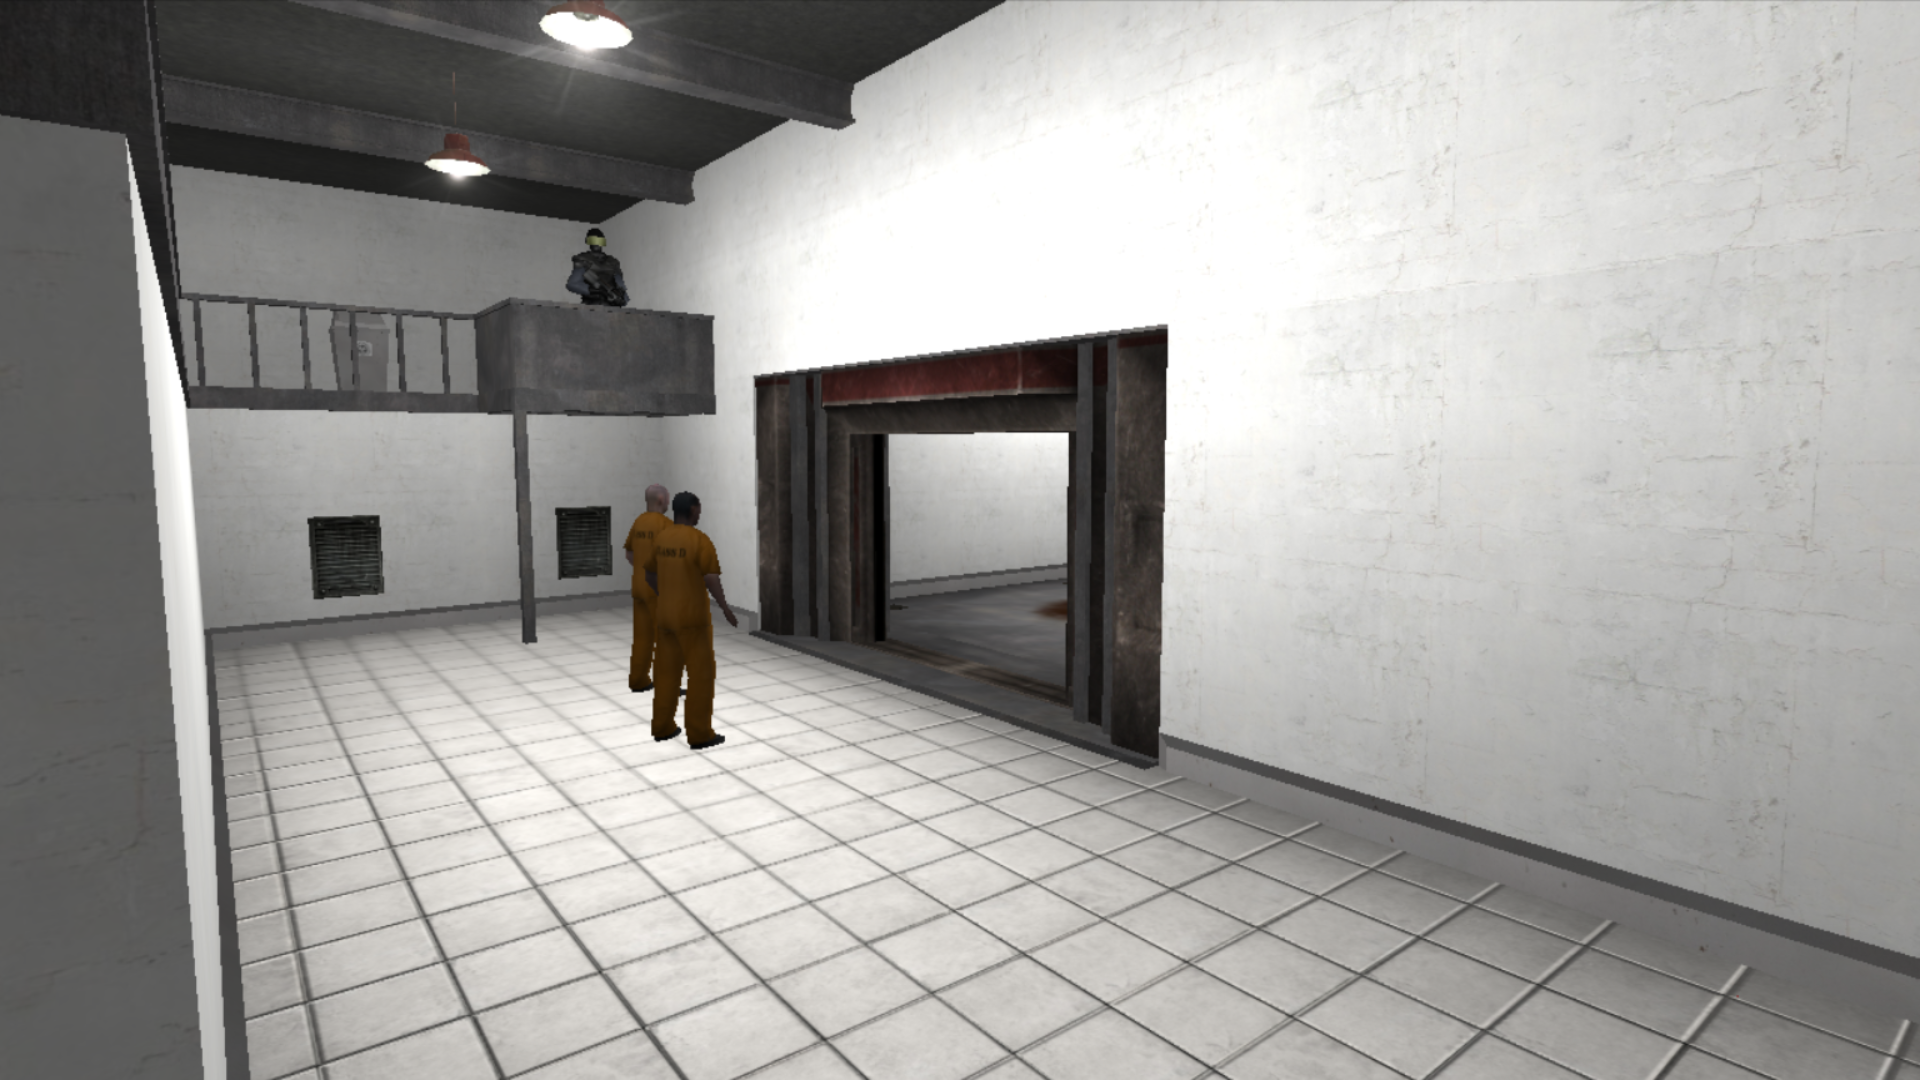 scp picture thing image - SCP: Containment Failure mod for SCP: Secret Labo...